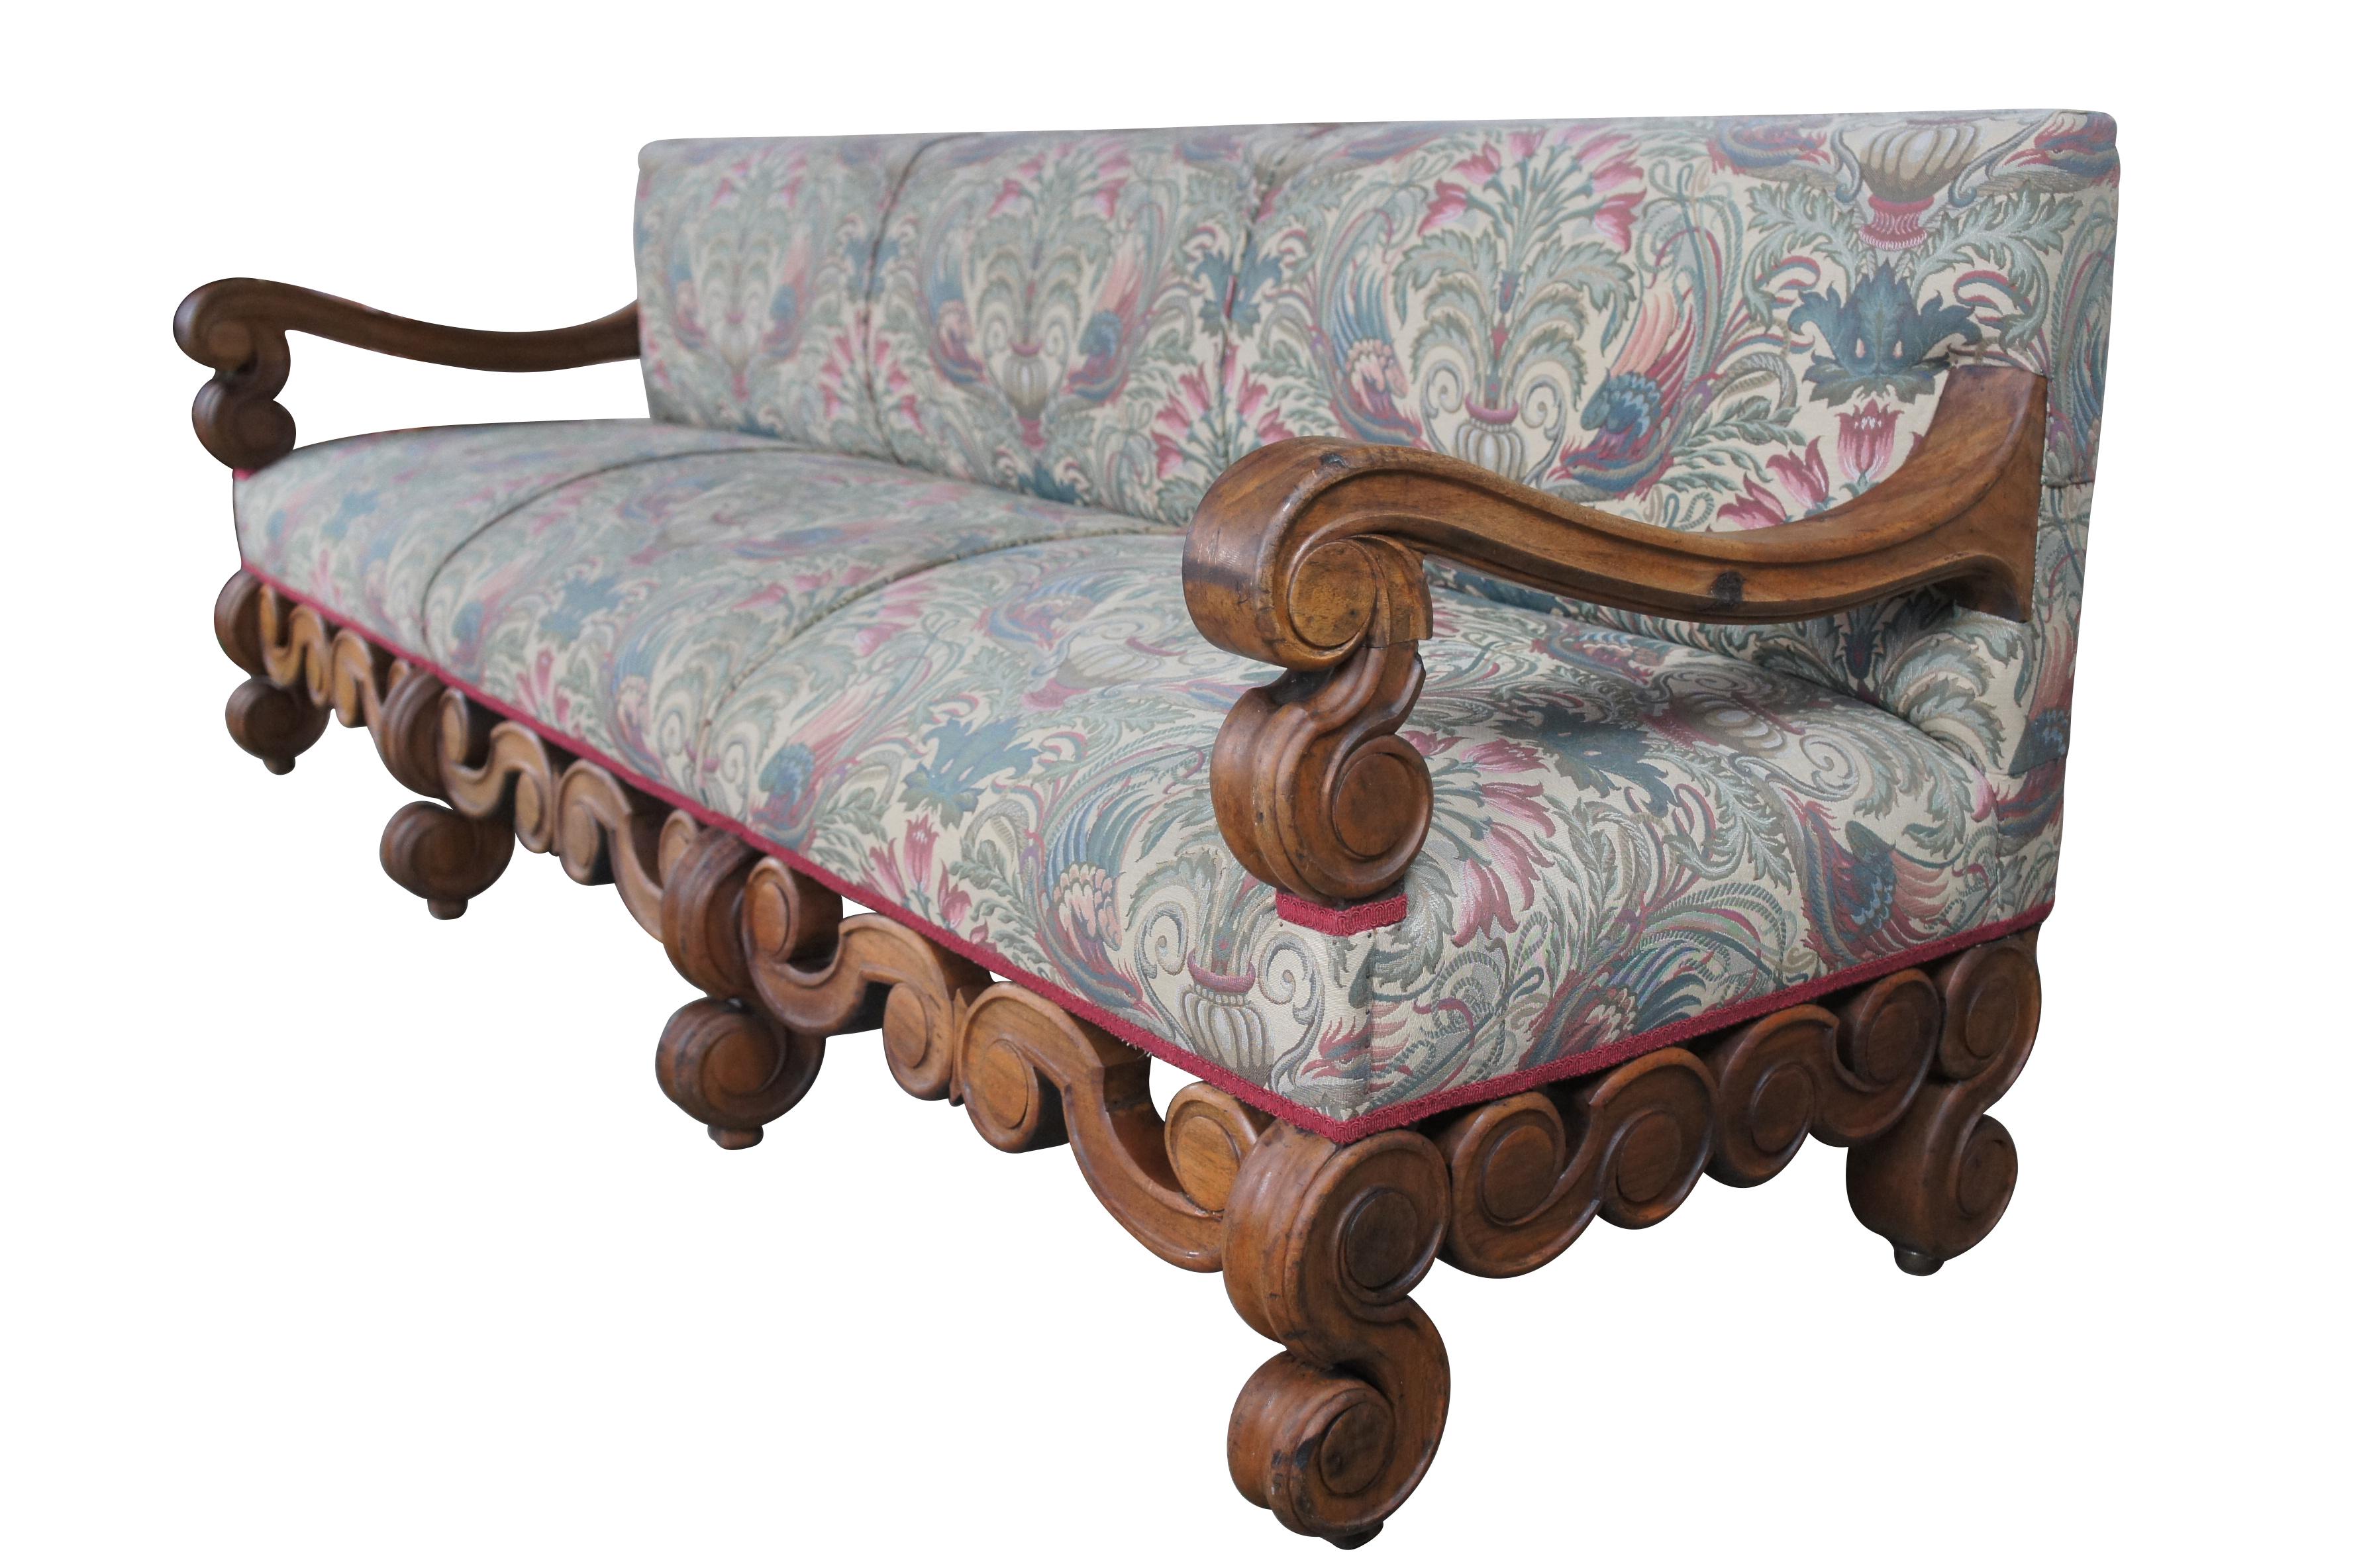 William and Mary Antique 18th C. William & Mary Mahogany Carved Settle Bench Sofa Empress Hotel For Sale